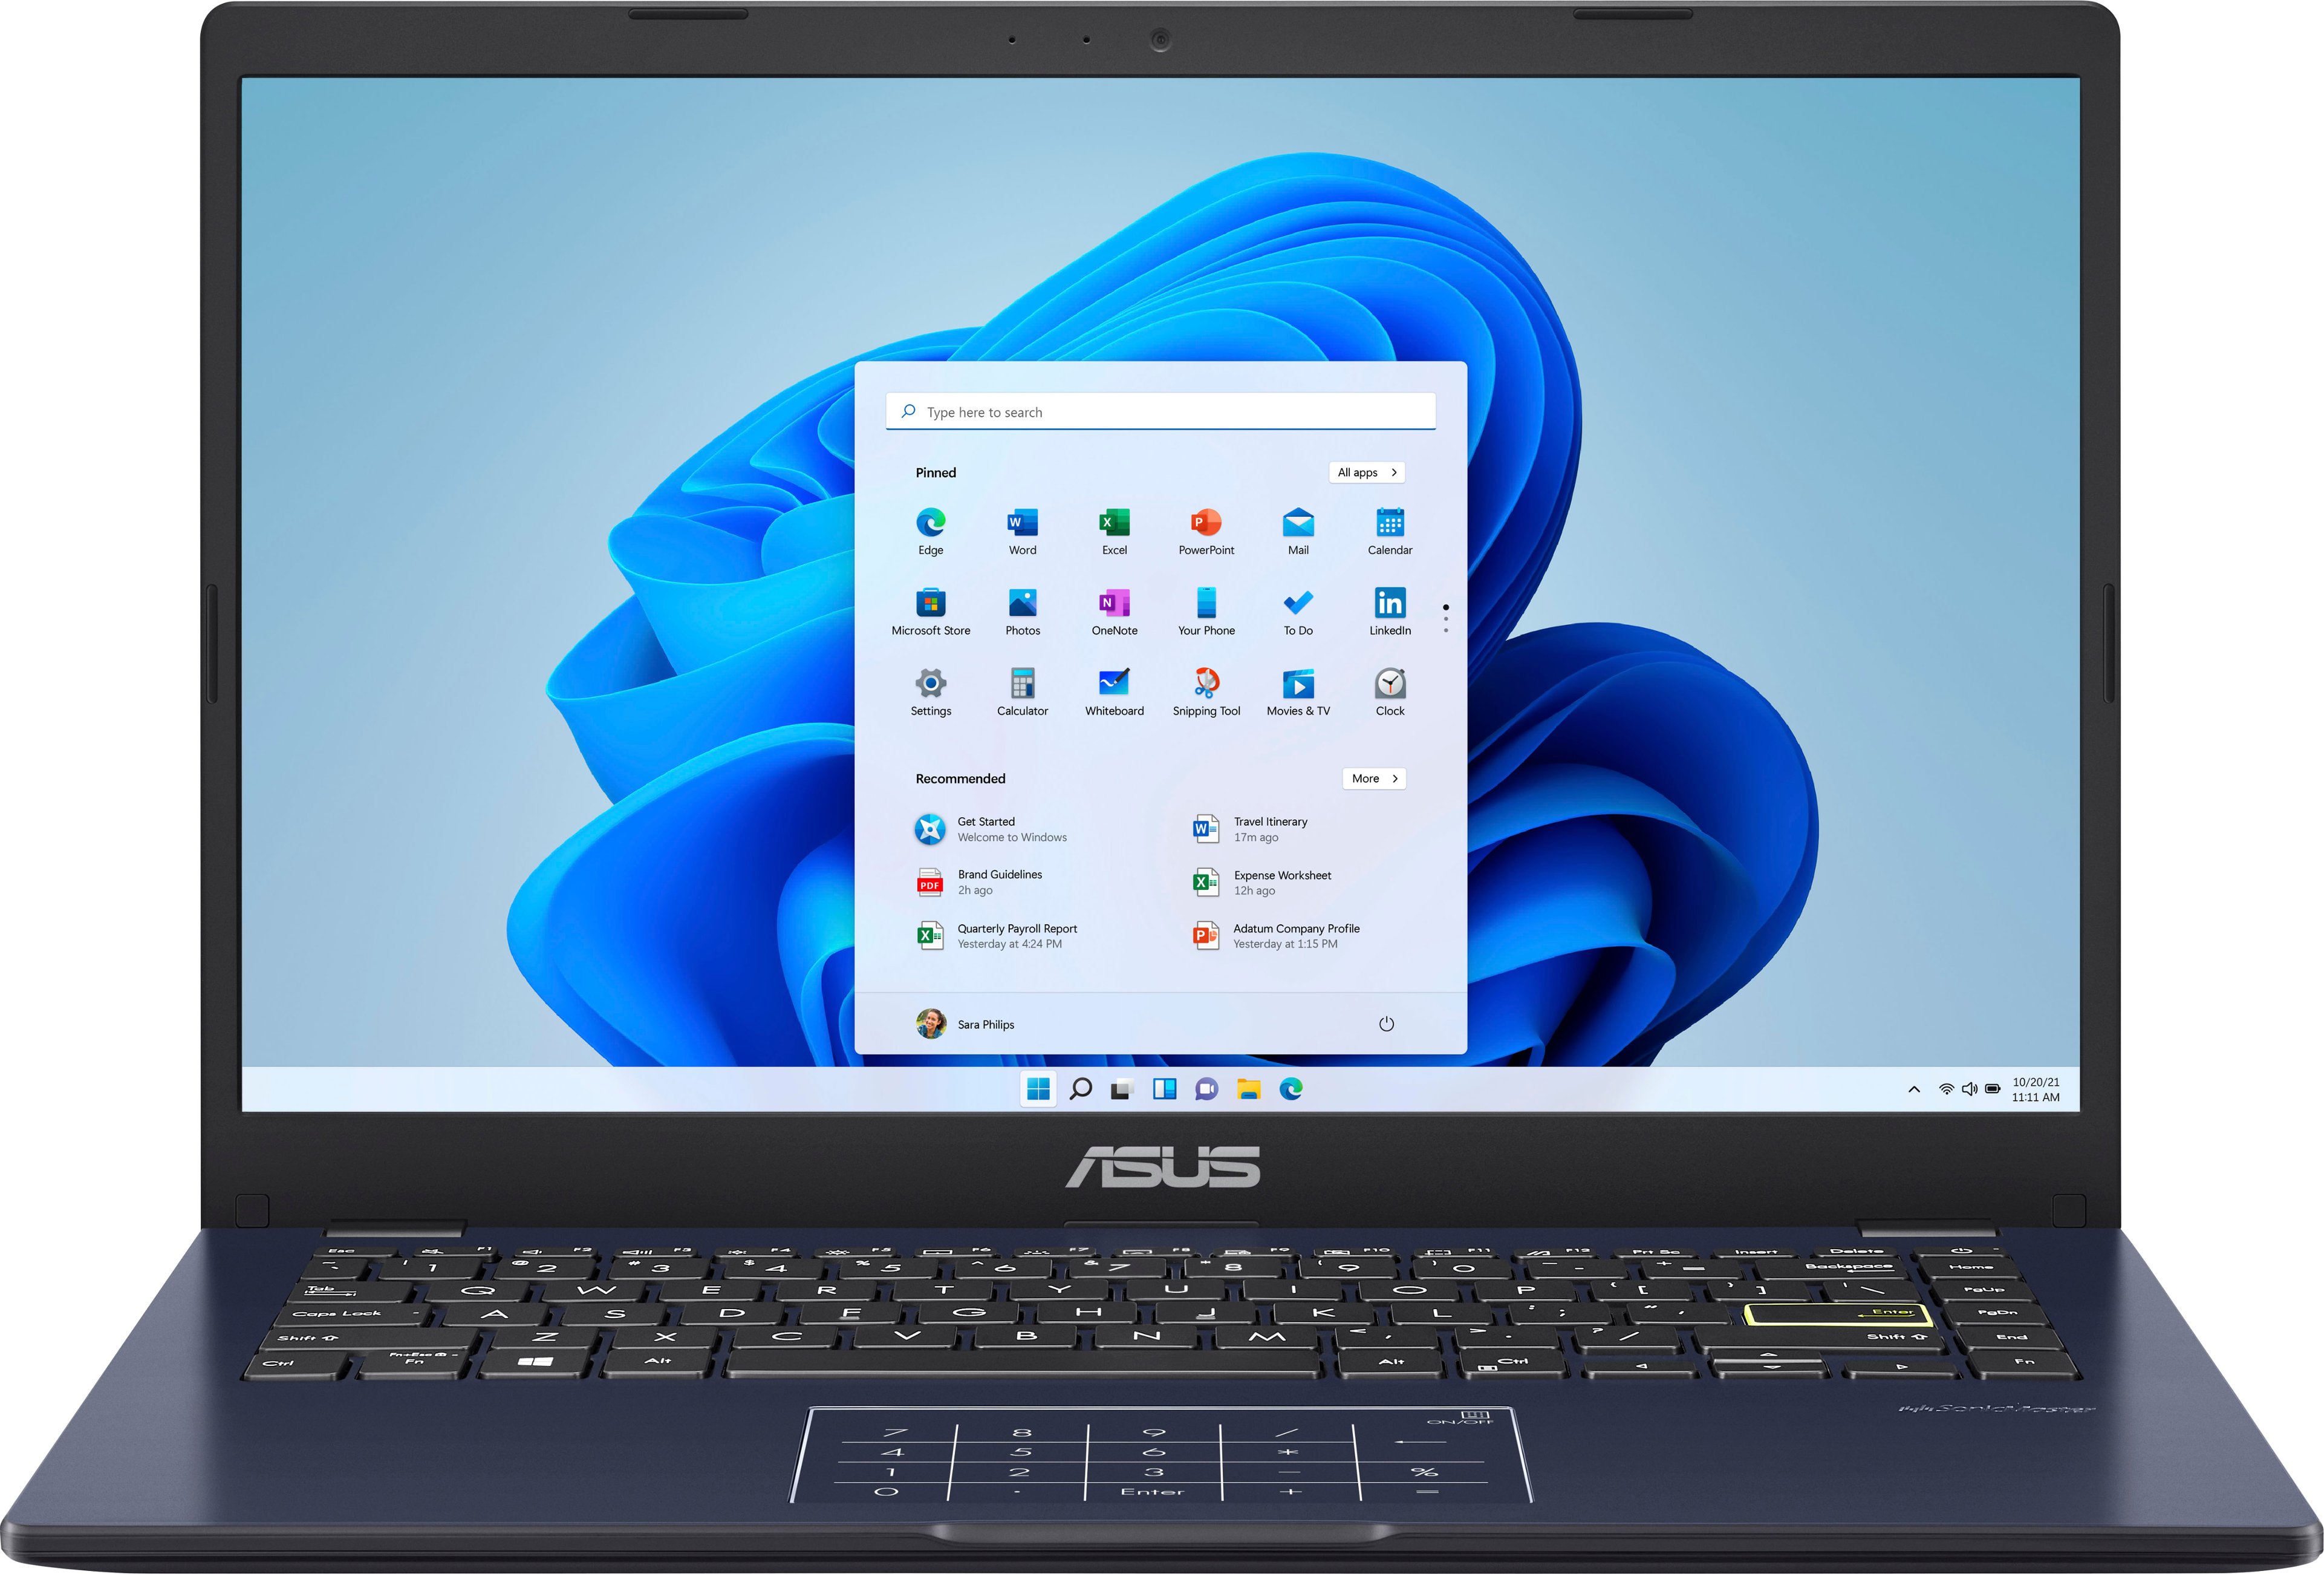 Asus E410 series: How to disassemble and change the battery 